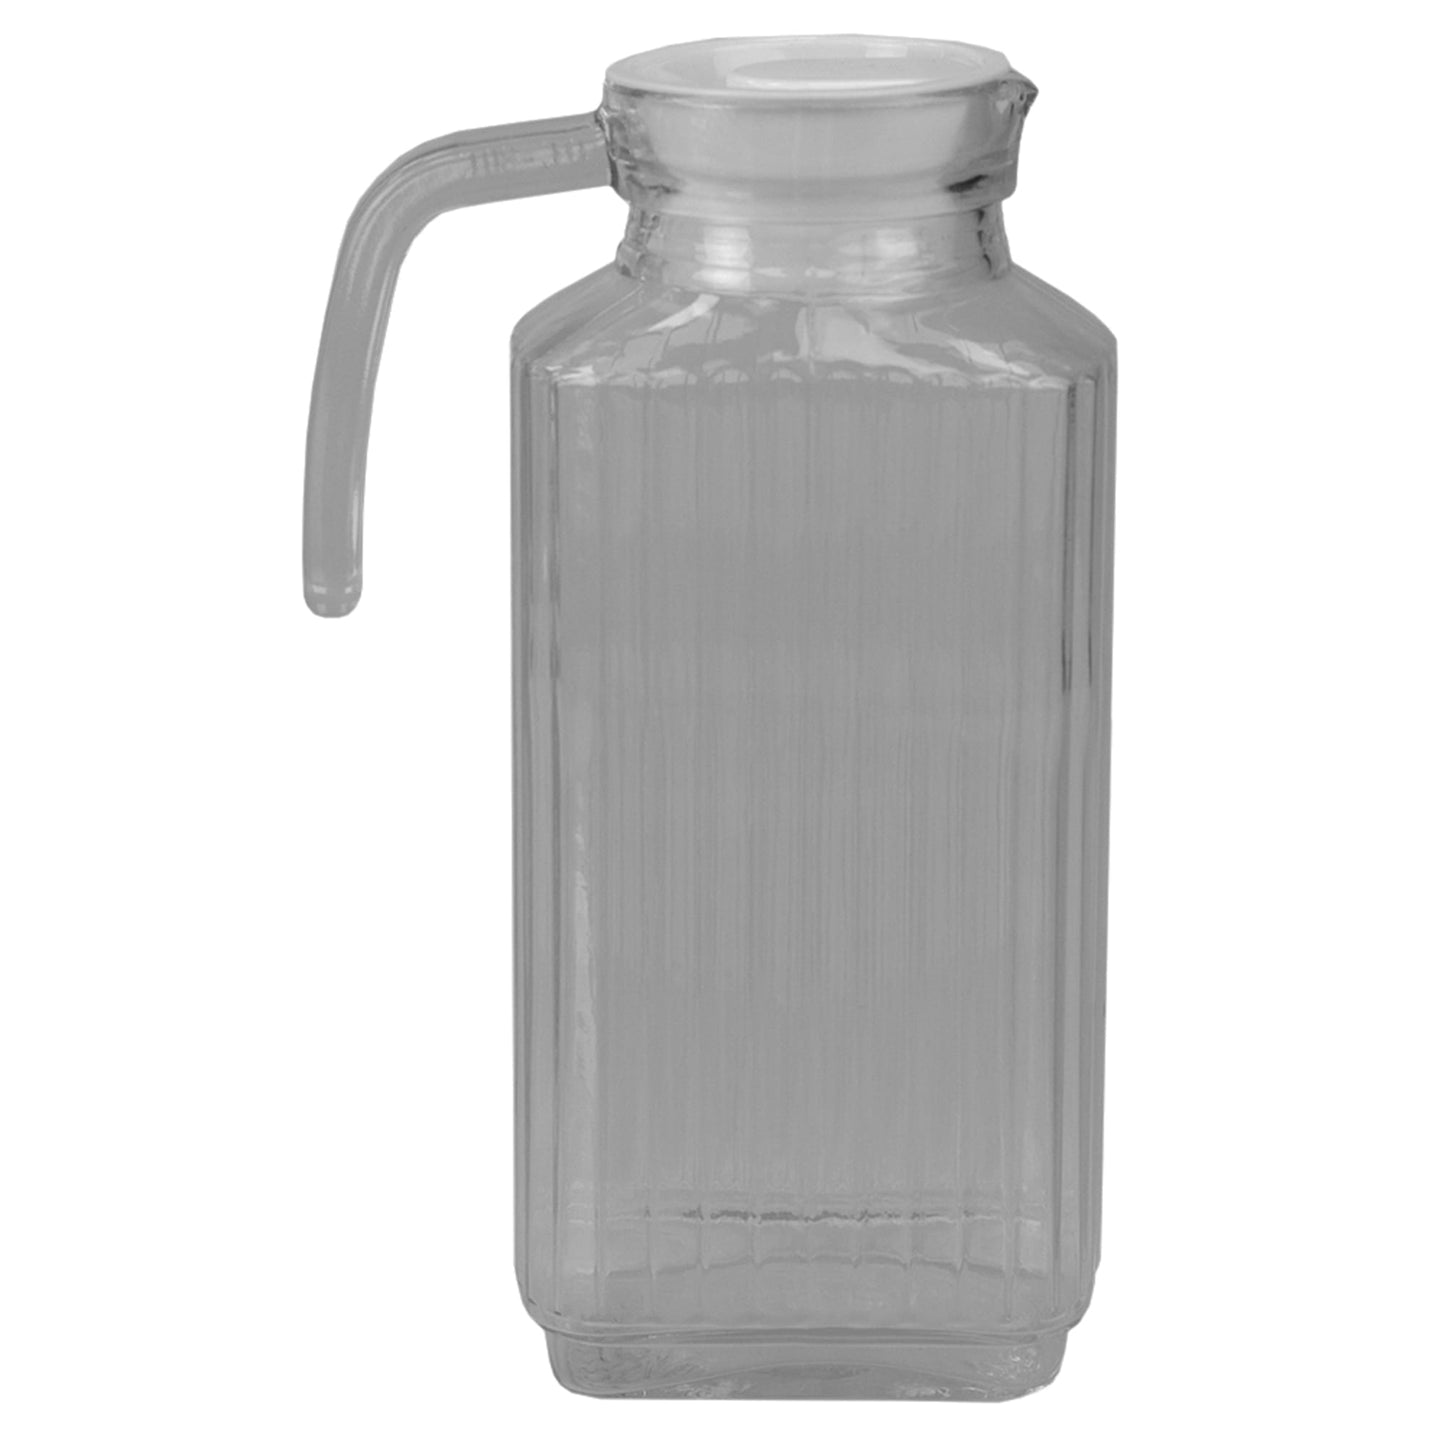 Embellished Glass 1.8 Lt Decorative Beverage Pitcher with No-Mess Pouring Spout and Solid Grip Handle, Clear